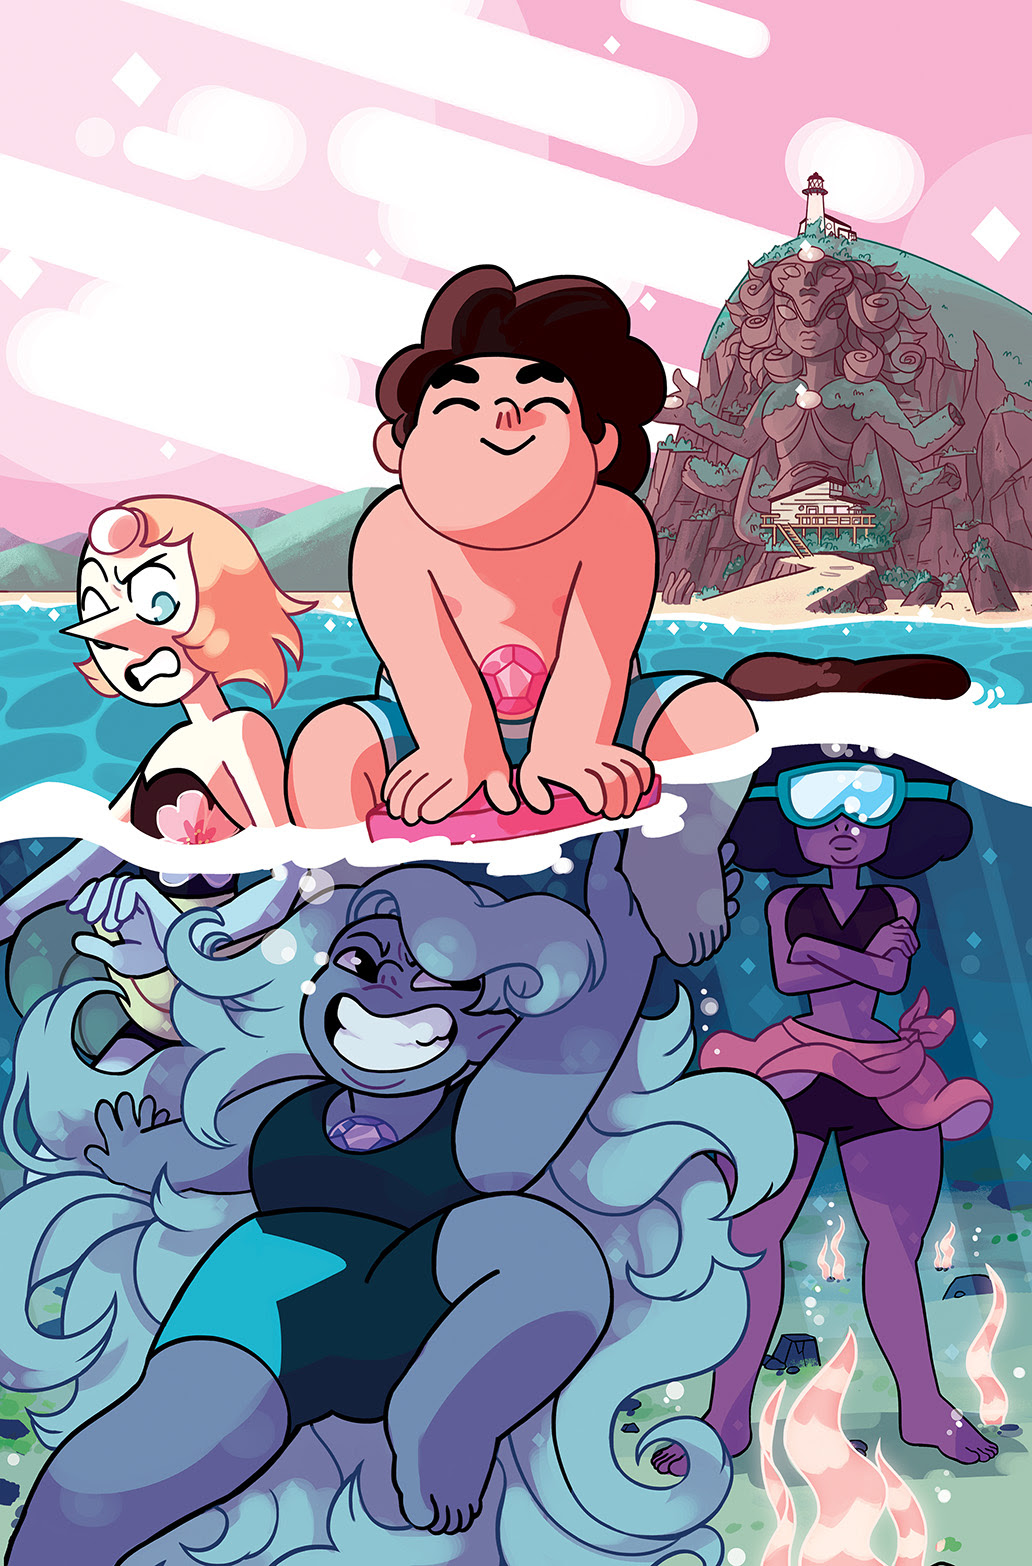 STEVEN UNIVERSE #2 Cover C by Amber Rogers